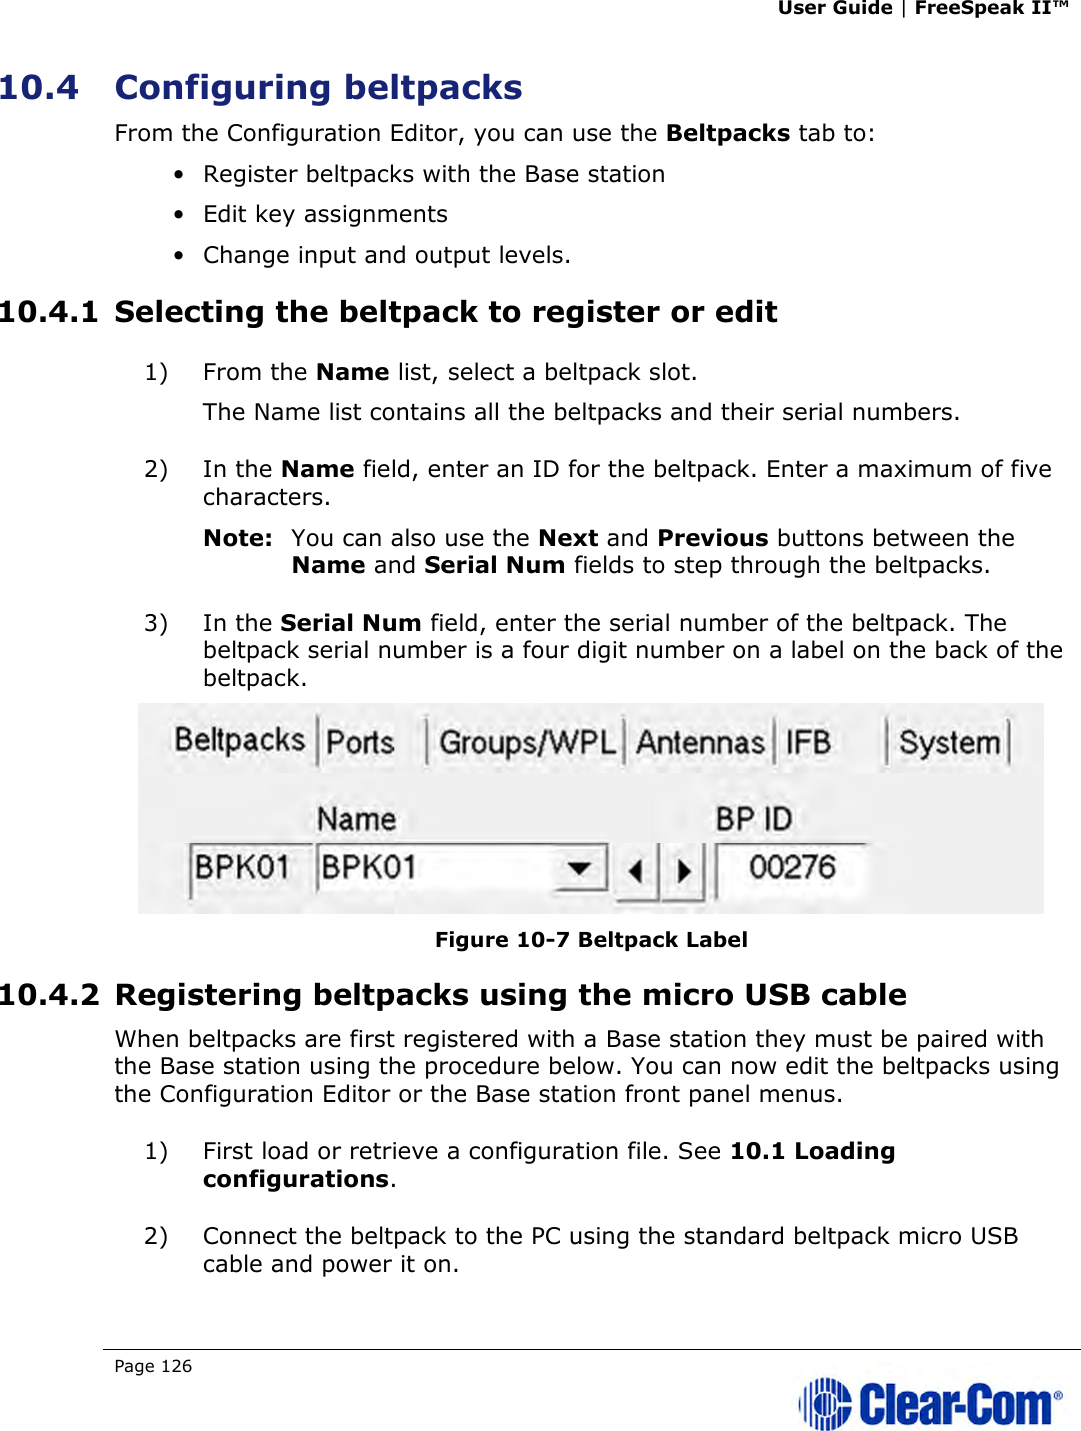 User Guide | FreeSpeak II™  Page 126   10.4 Configuring beltpacks From the Configuration Editor, you can use the Beltpacks tab to: • Register beltpacks with the Base station • Edit key assignments  • Change input and output levels. 10.4.1 Selecting the beltpack to register or edit 1) From the Name list, select a beltpack slot.  The Name list contains all the beltpacks and their serial numbers.  2) In the Name field, enter an ID for the beltpack. Enter a maximum of five characters. Note: You can also use the Next and Previous buttons between the Name and Serial Num fields to step through the beltpacks. 3) In the Serial Num field, enter the serial number of the beltpack. The beltpack serial number is a four digit number on a label on the back of the beltpack.  Figure 10-7 Beltpack Label 10.4.2 Registering beltpacks using the micro USB cable When beltpacks are first registered with a Base station they must be paired with the Base station using the procedure below. You can now edit the beltpacks using the Configuration Editor or the Base station front panel menus. 1) First load or retrieve a configuration file. See 10.1 Loading configurations. 2) Connect the beltpack to the PC using the standard beltpack micro USB cable and power it on. 